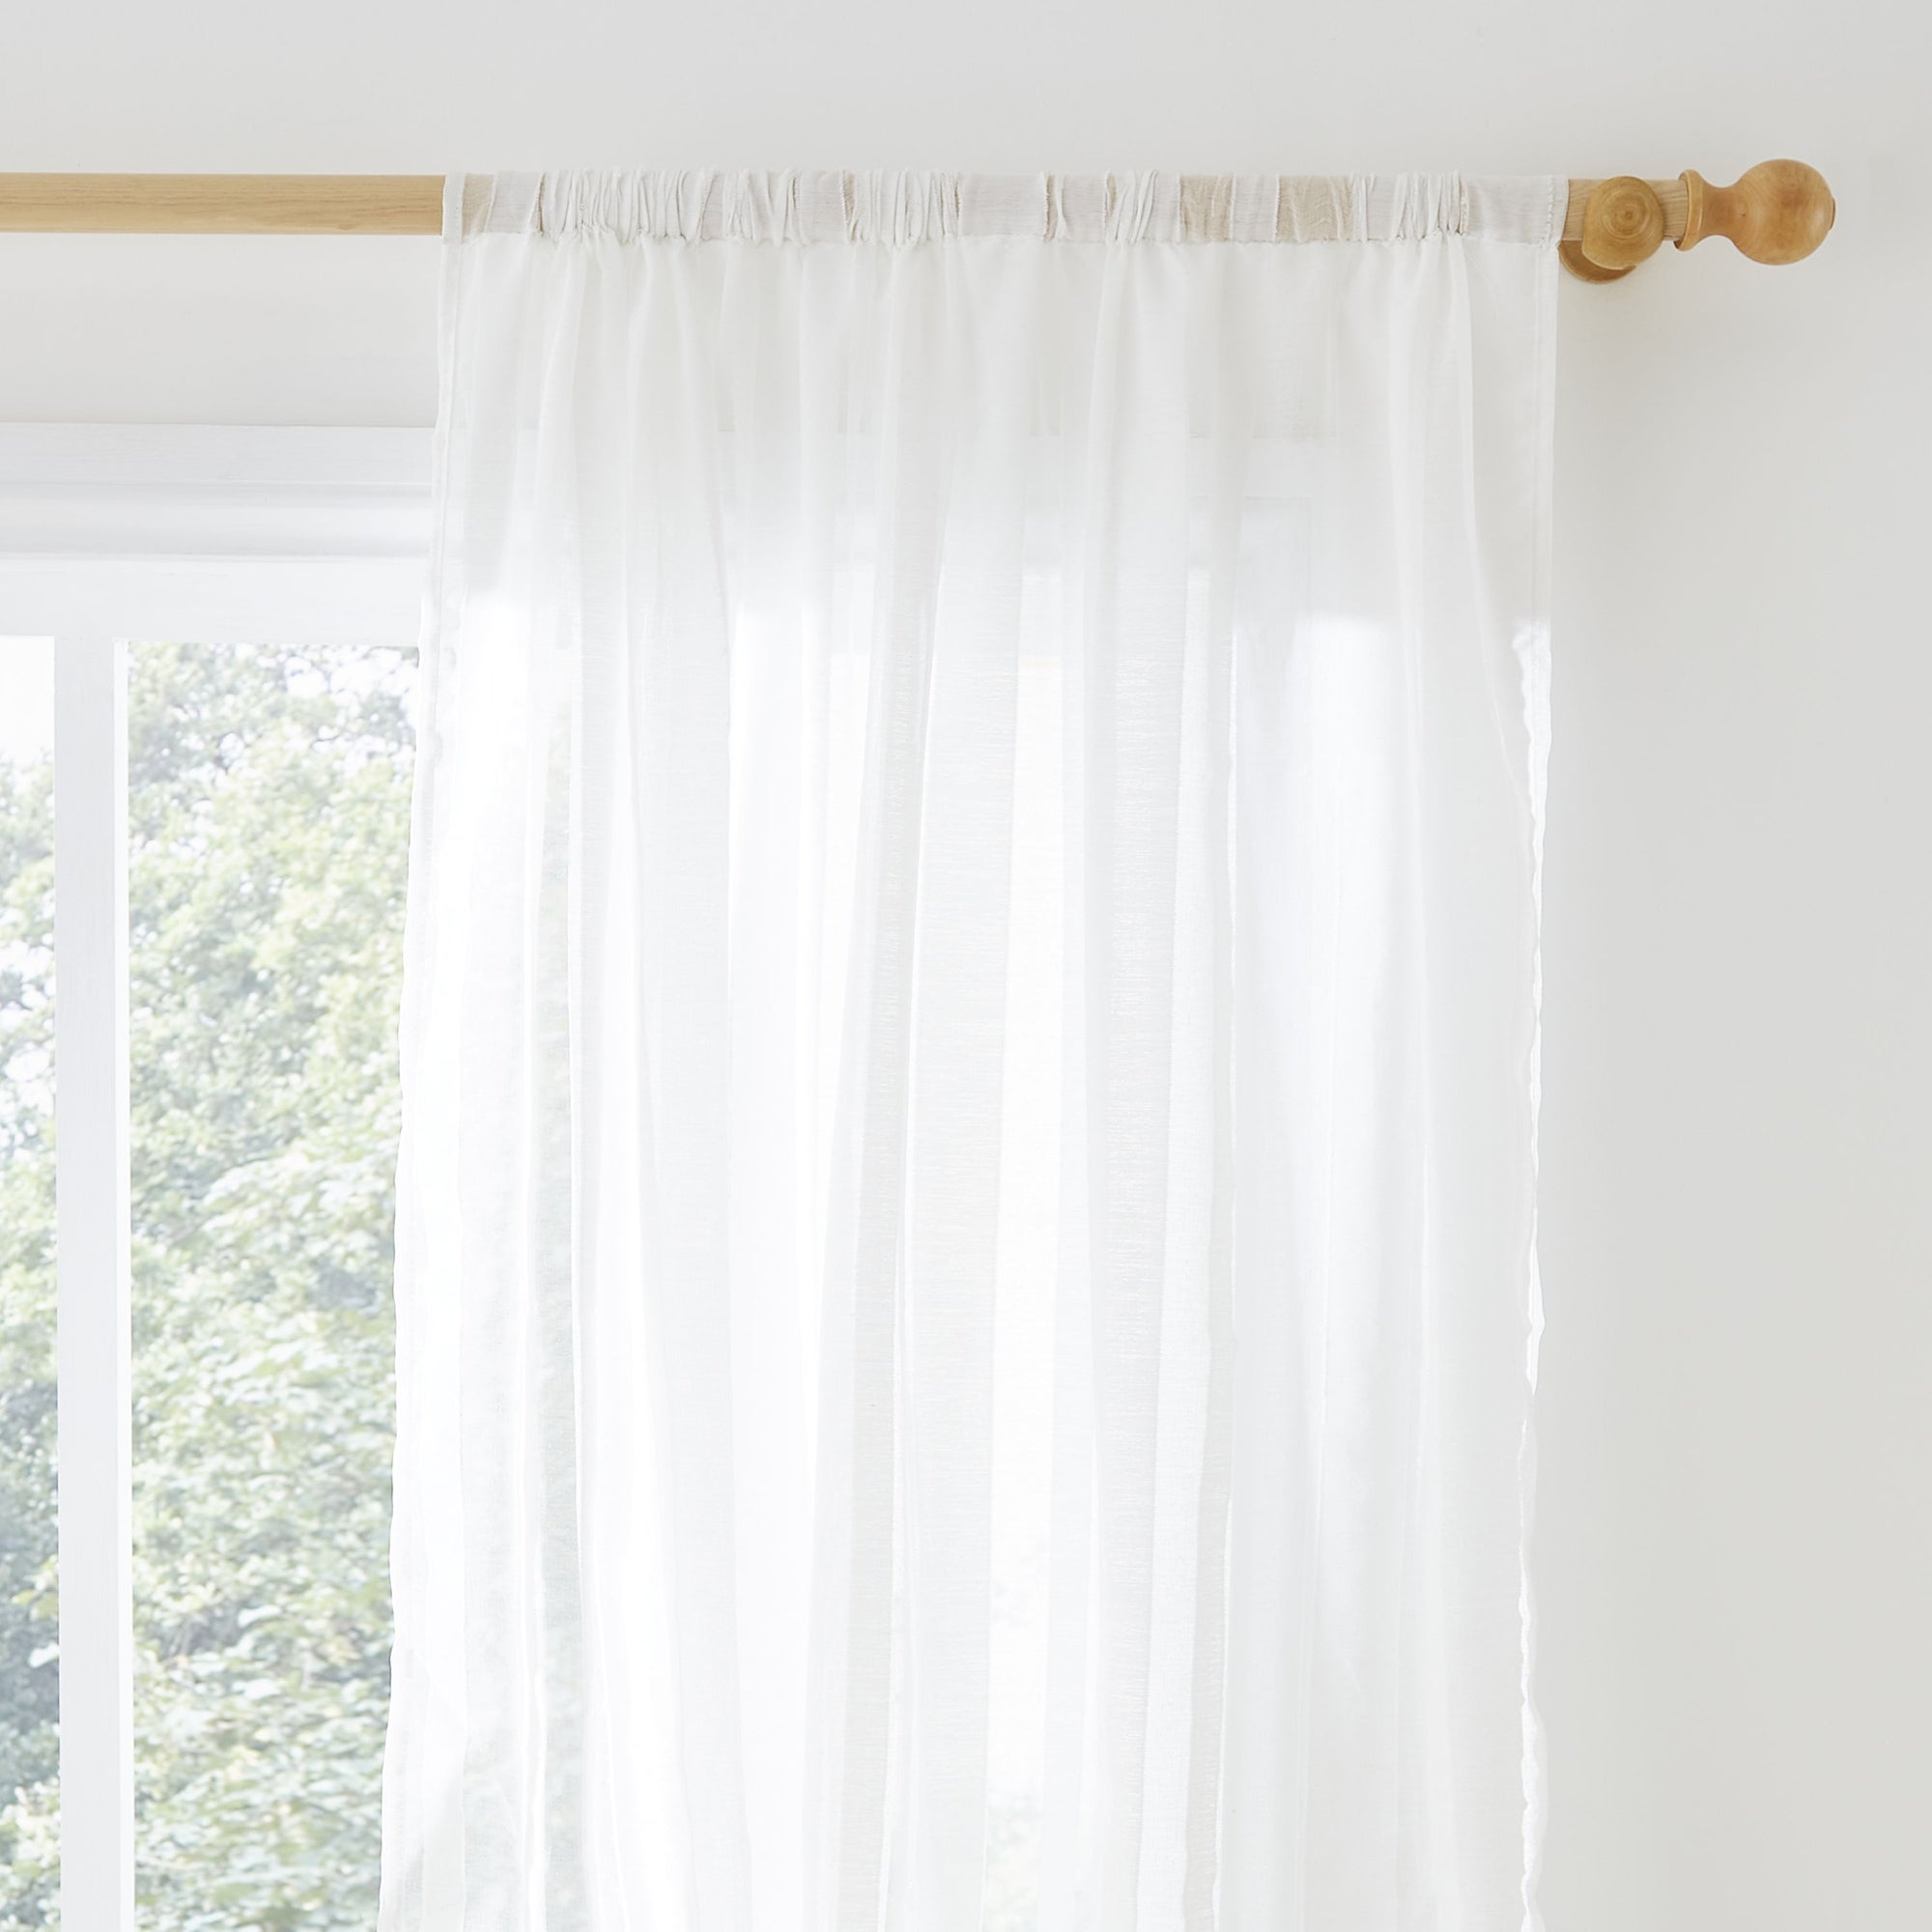 Voile & Net Curtains - Browse Our Full Range | Dunelm | Page 2